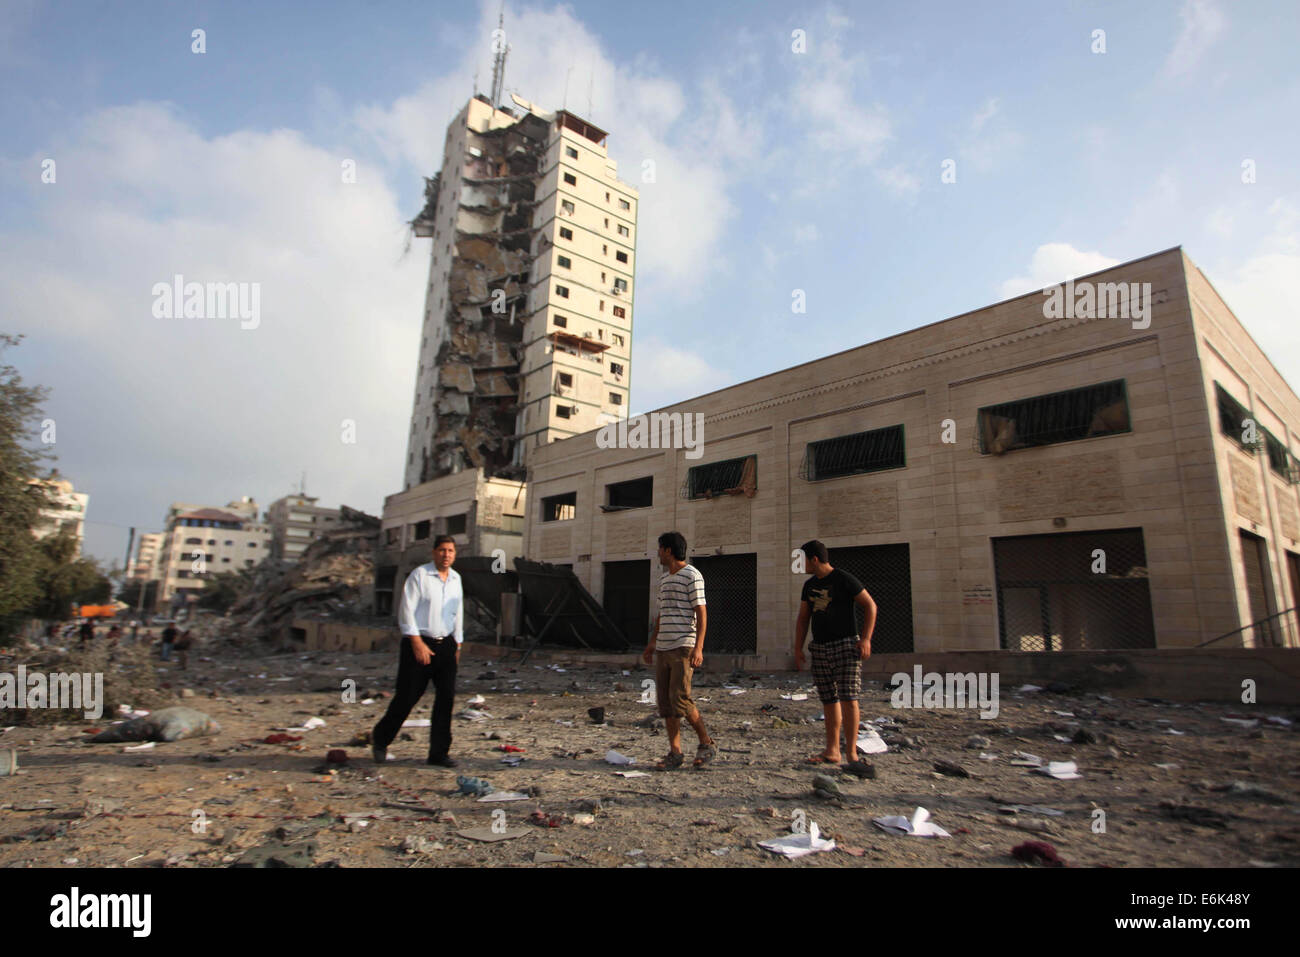 Gaza City, Gaza Strip, Palestinian Territory. 26th Aug, 2014. Palestinians stand next to the remains of one of Gaza's tallest apartment towers, which witnesses said was hit by an Israeli air strike that destroyed much of it, in Gaza City . Israeli air strikes launched before dawn on Tuesday killed two Palestinians and destroyed much of one of Gaza's tallest apartment and office buildings, setting off huge explosions and wounding 20 people. Credit:  ZUMA Press, Inc./Alamy Live News Stock Photo